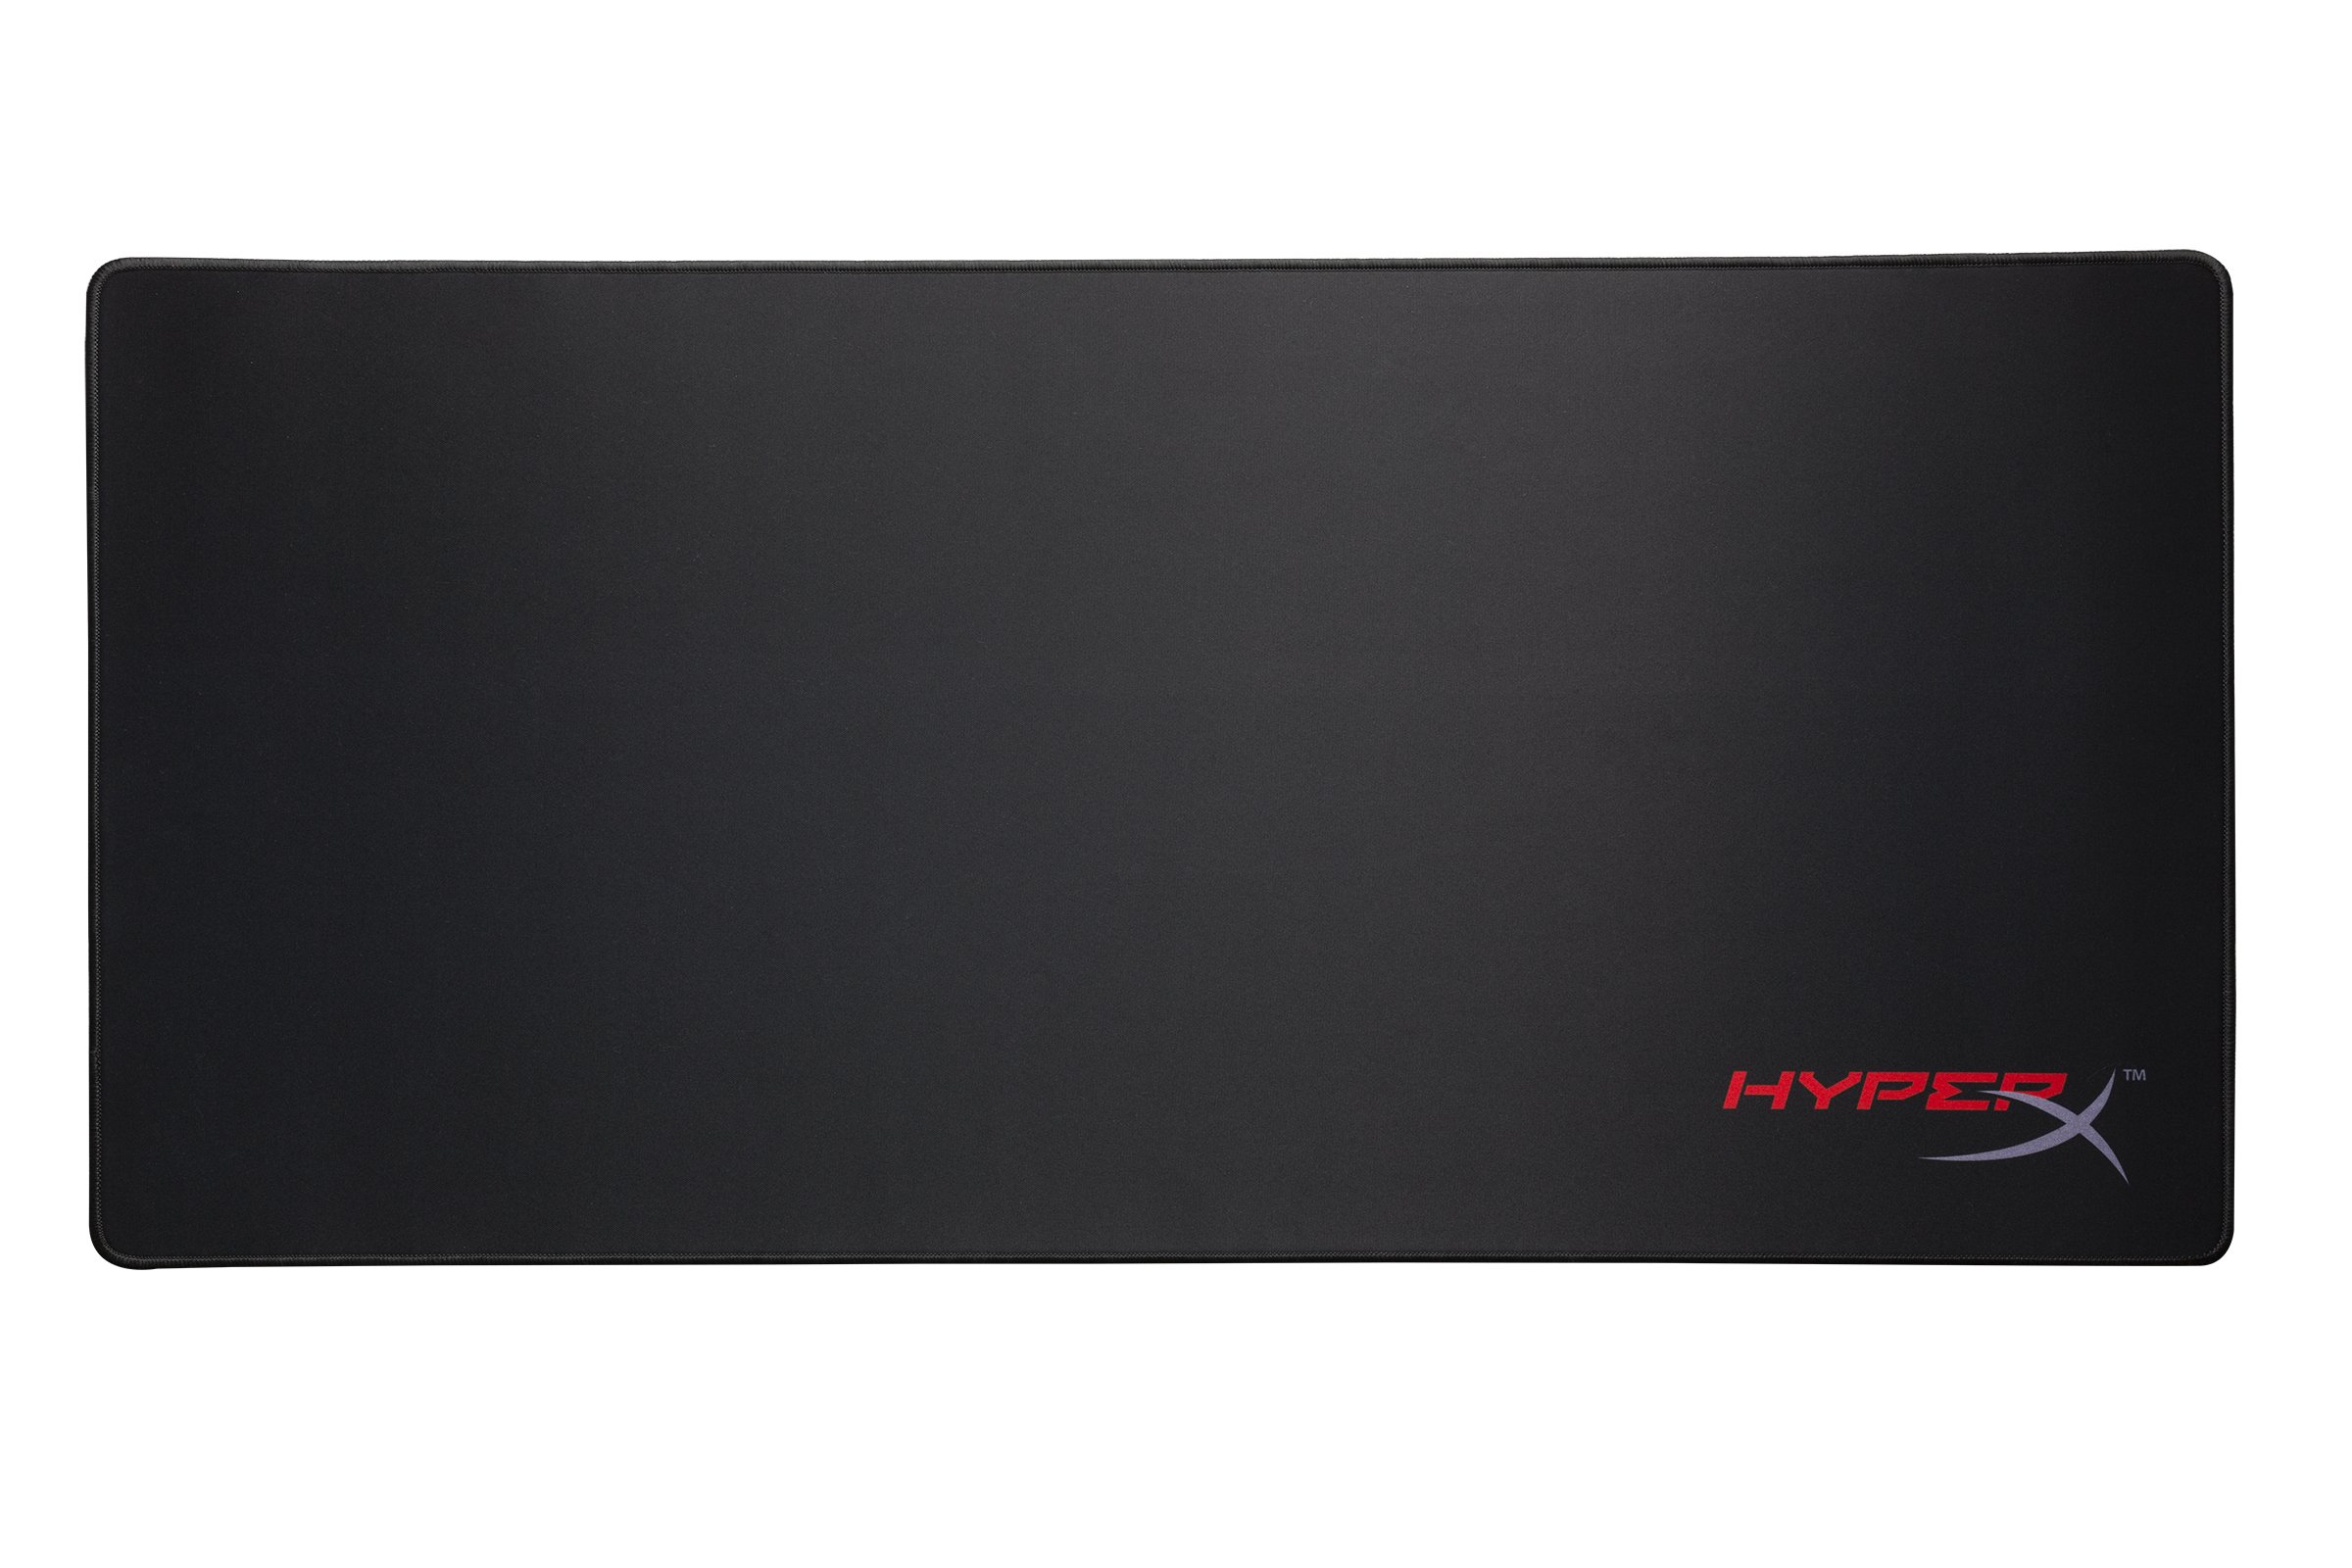 HyperX Fury S - Pro Gaming Mouse Pad  X-Large, Cloth Surface Optimized for Precision, Stitched Anti-Fray Edges, 900x420x4mm | Free Shipping w/ Prime or on orders $25+ $14.99